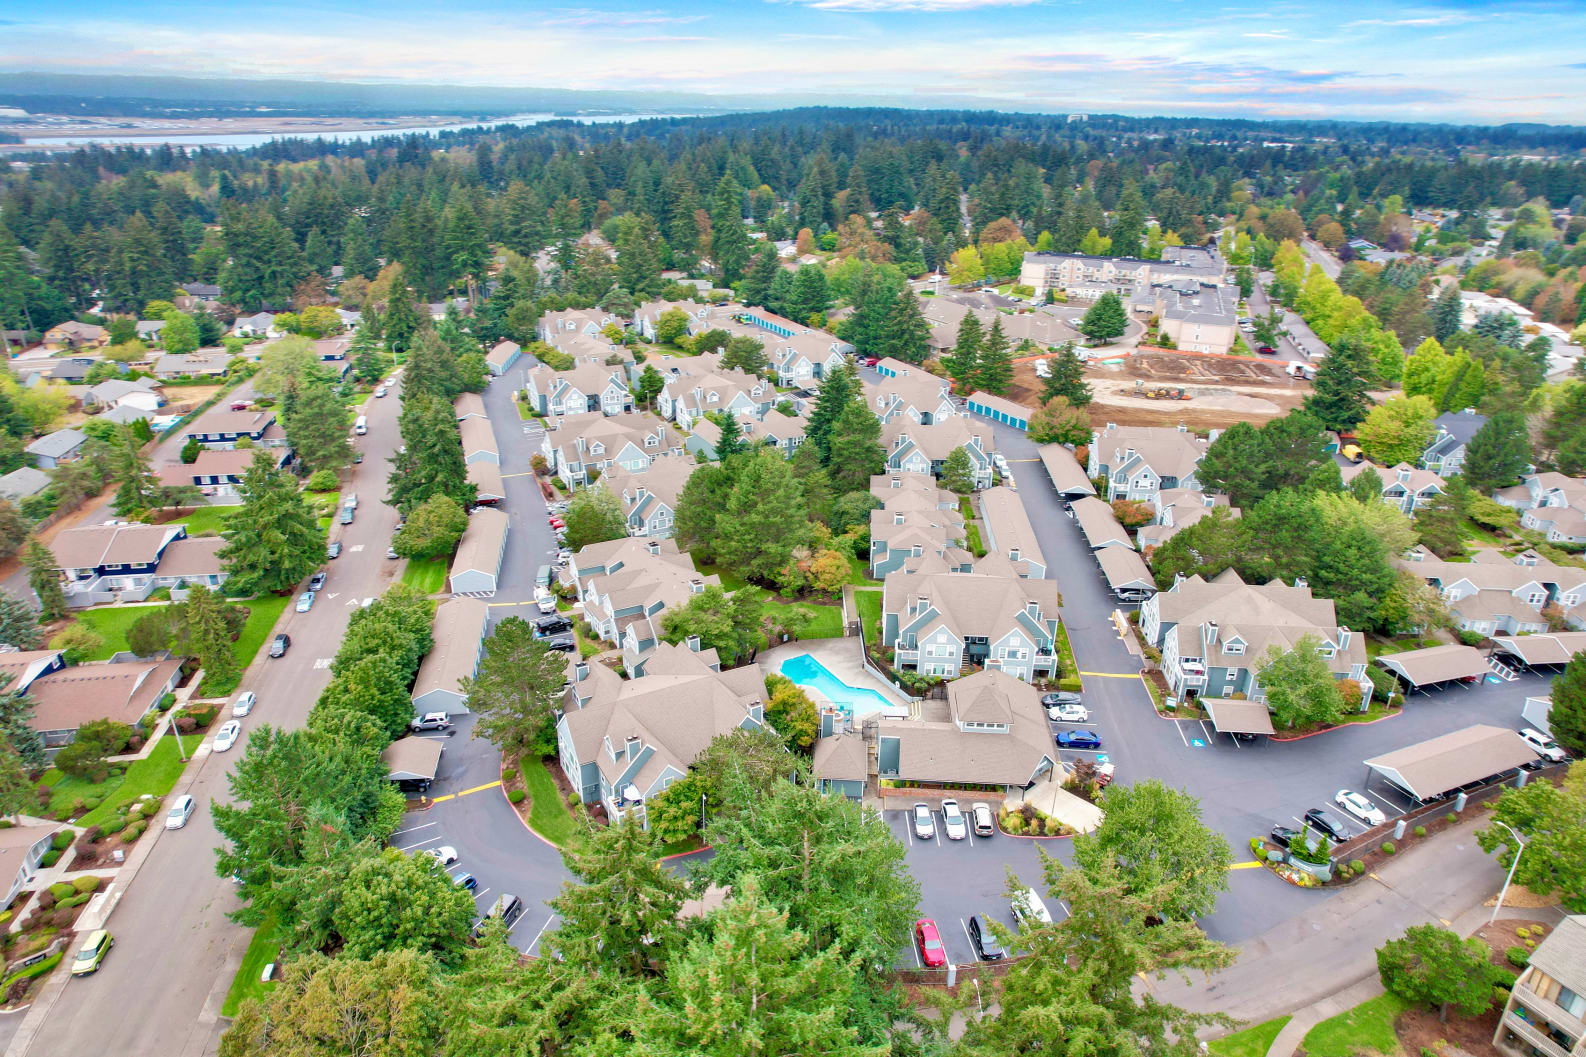 Aerial view of community, lots of trees